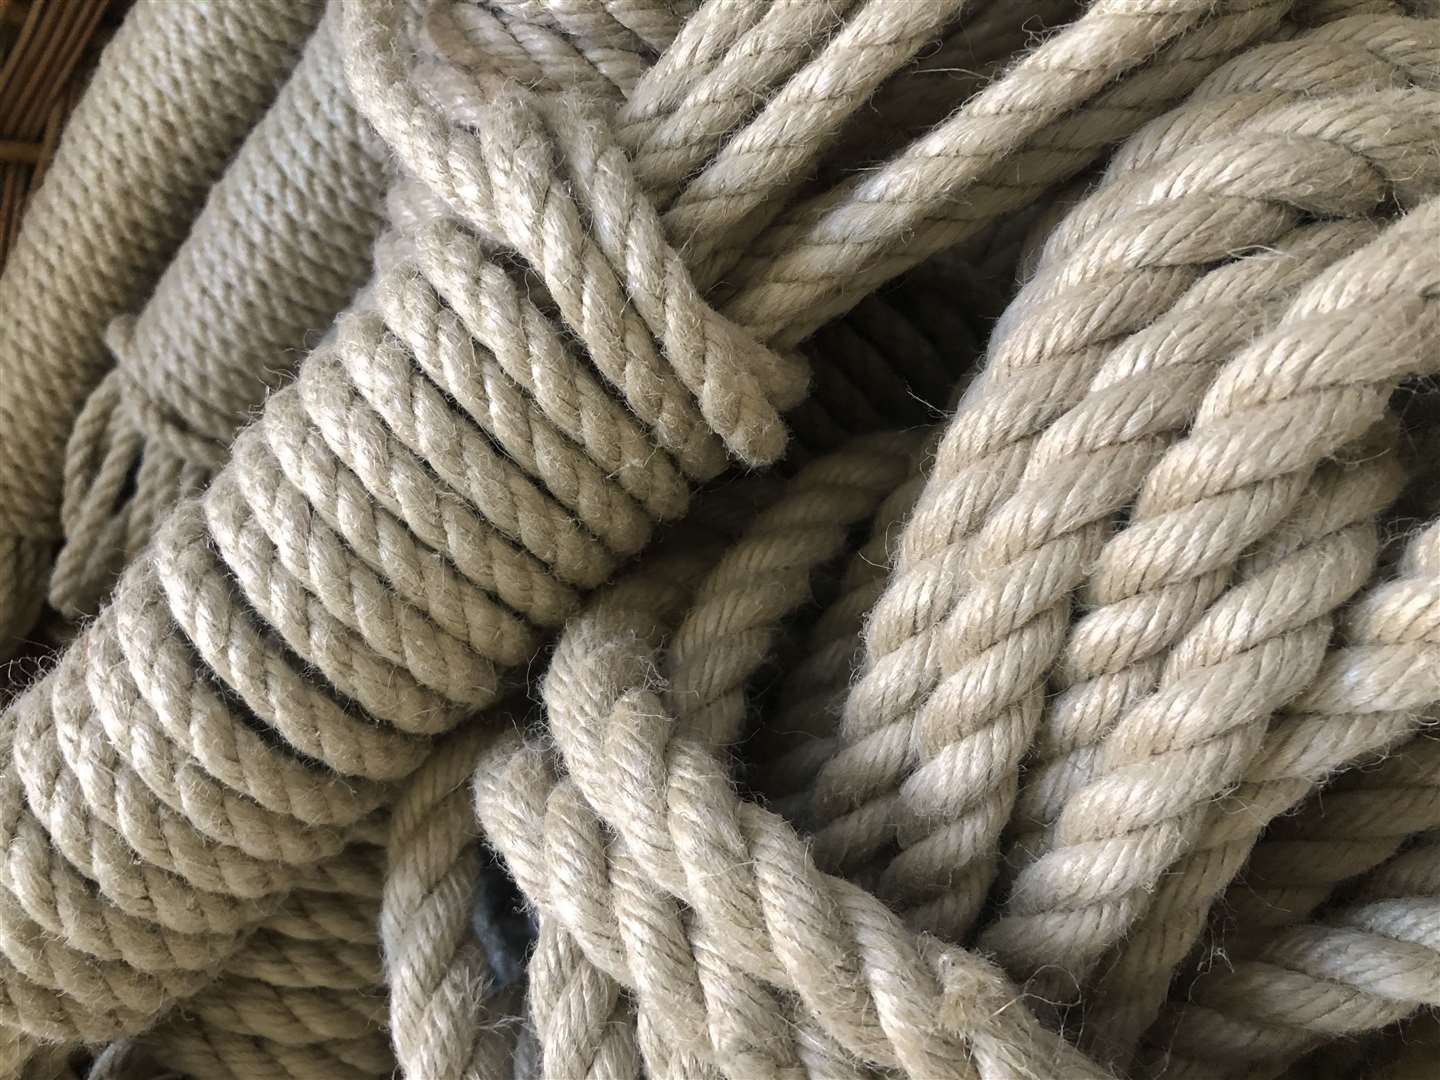 The rope will be on sale again - but the dockyard as an attraction remains shut